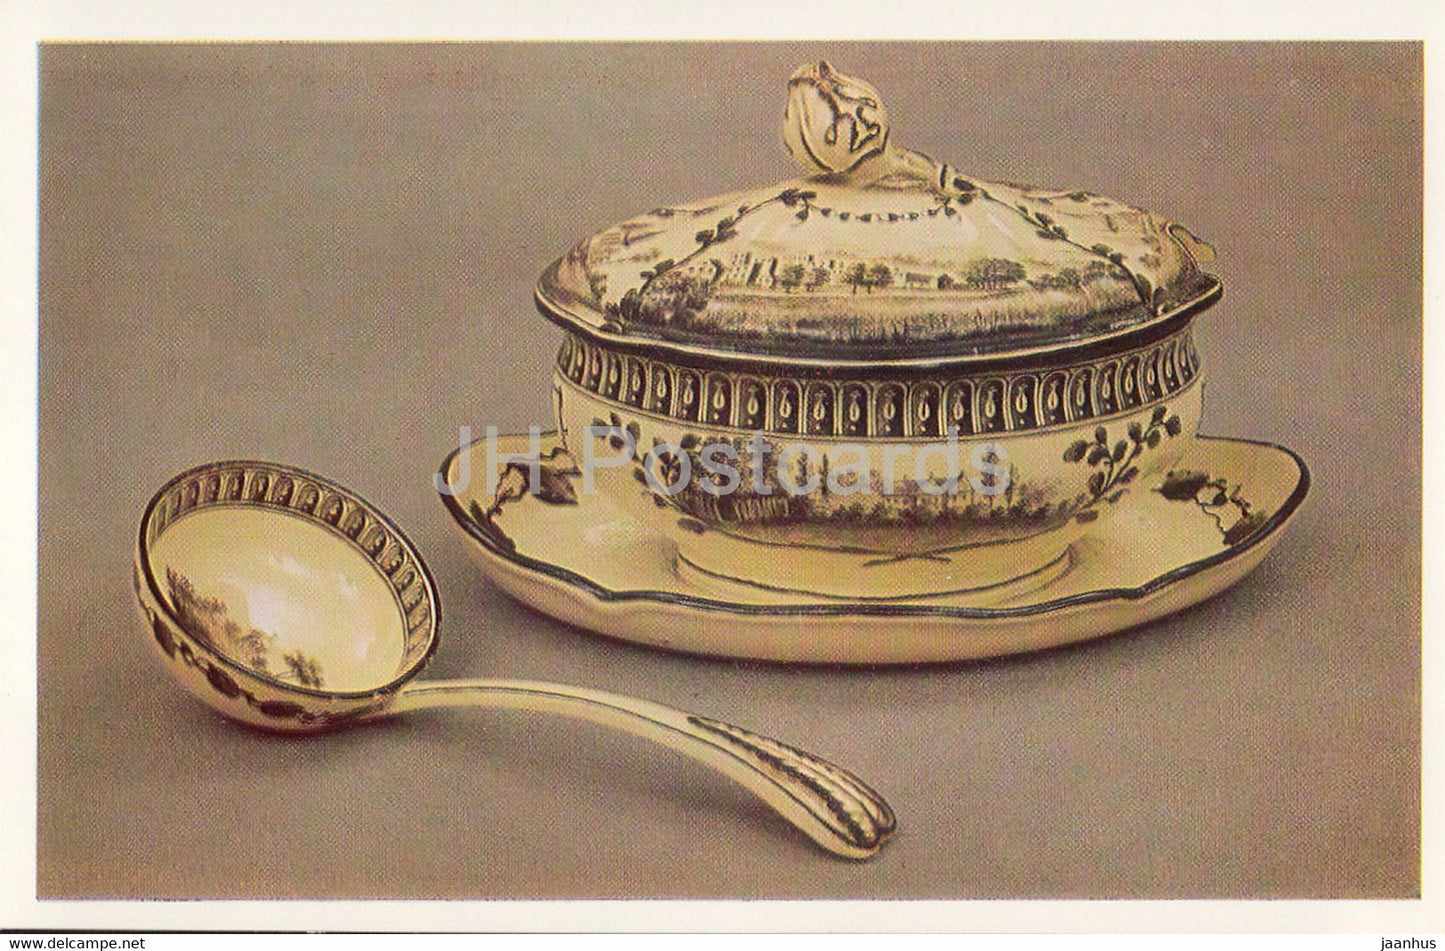 The Hermitage, Leningrad,English Applied Art - Sauce-boat. Wedgwood. 1773-74 - Russia - USSR - 1983 - used - JH Postcards